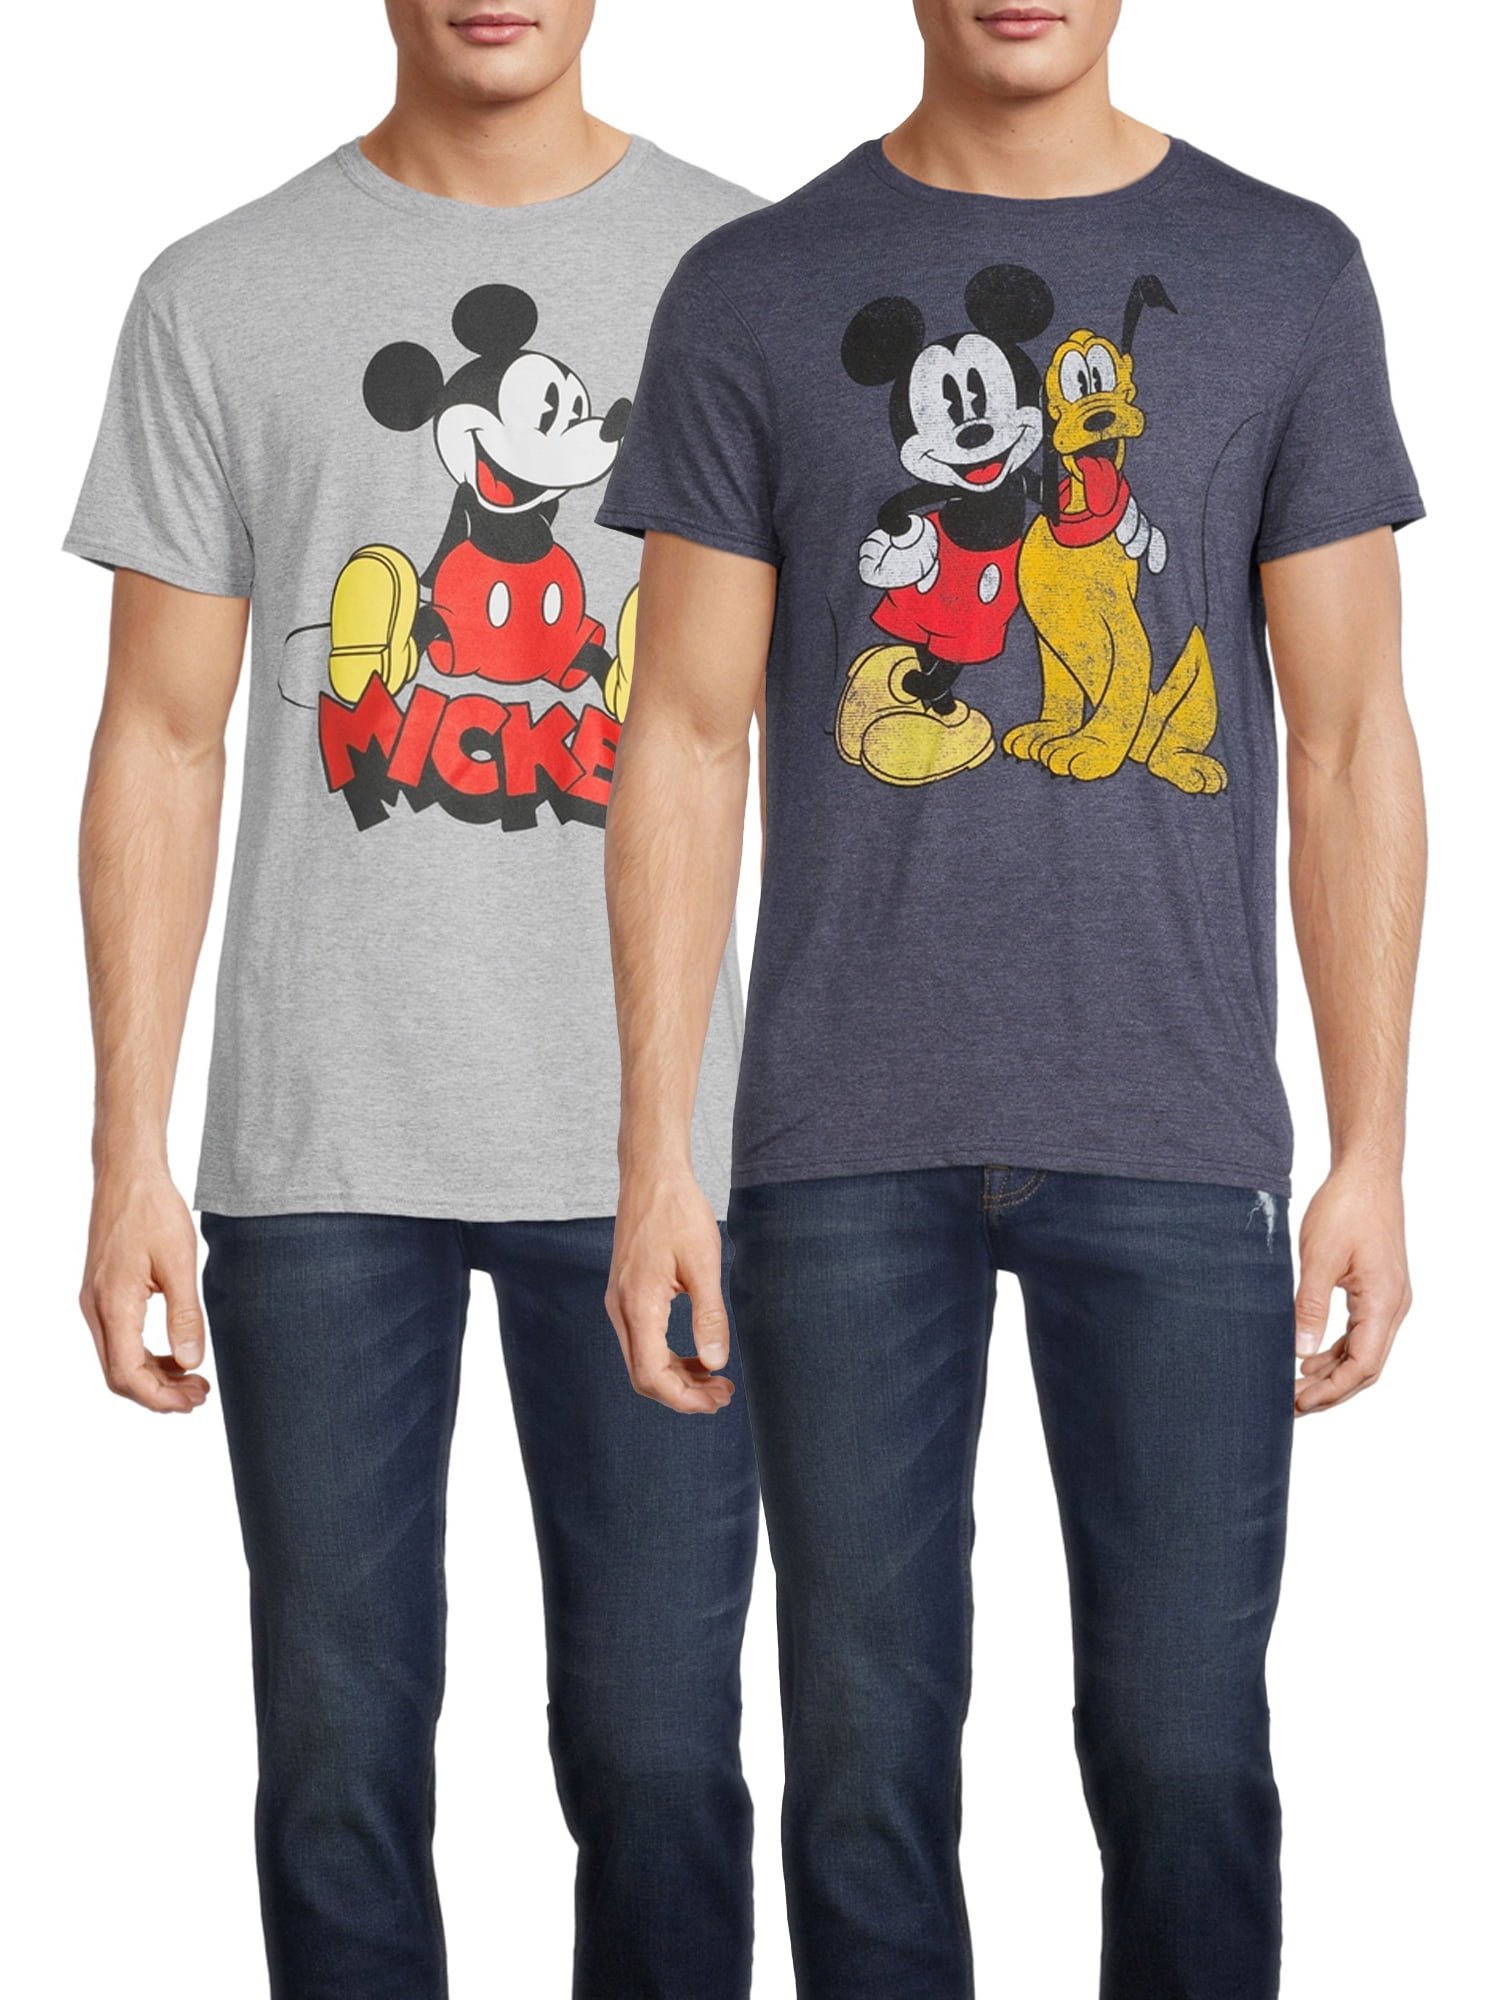 Mickey Mouse Headphones Mens Graphic T Shirt 